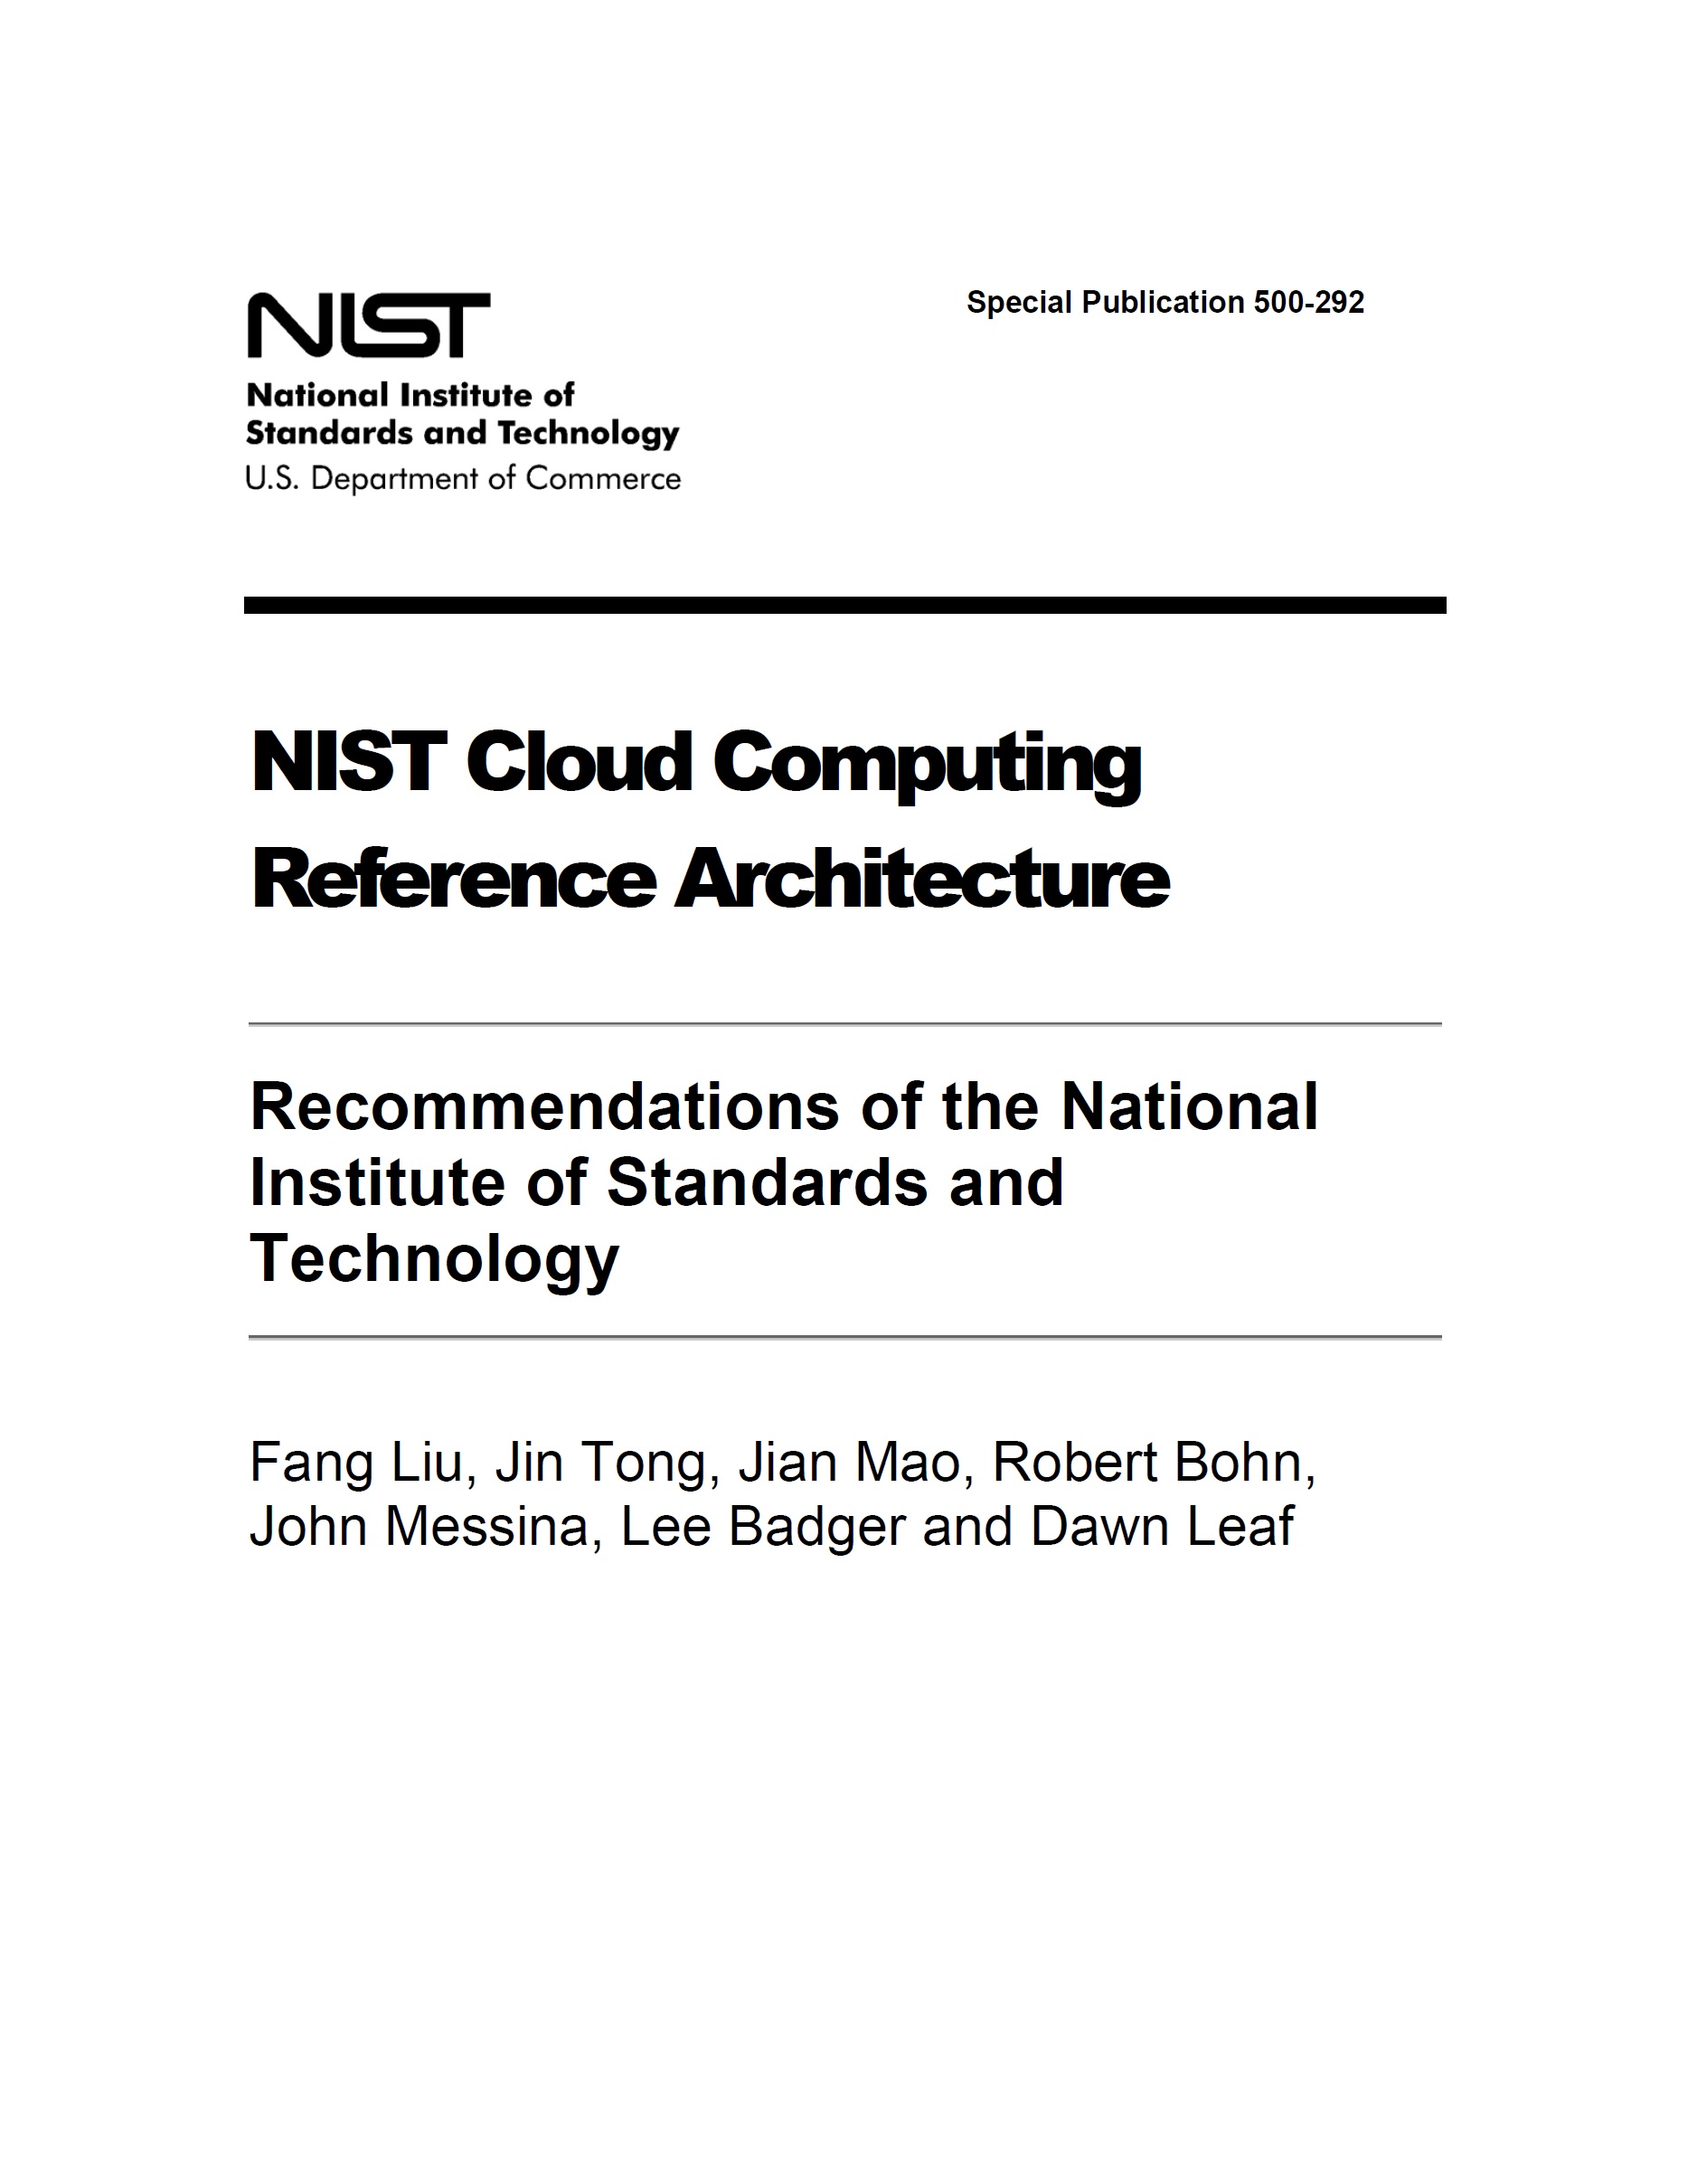 Cloud Computing Reference Architecture – NIST